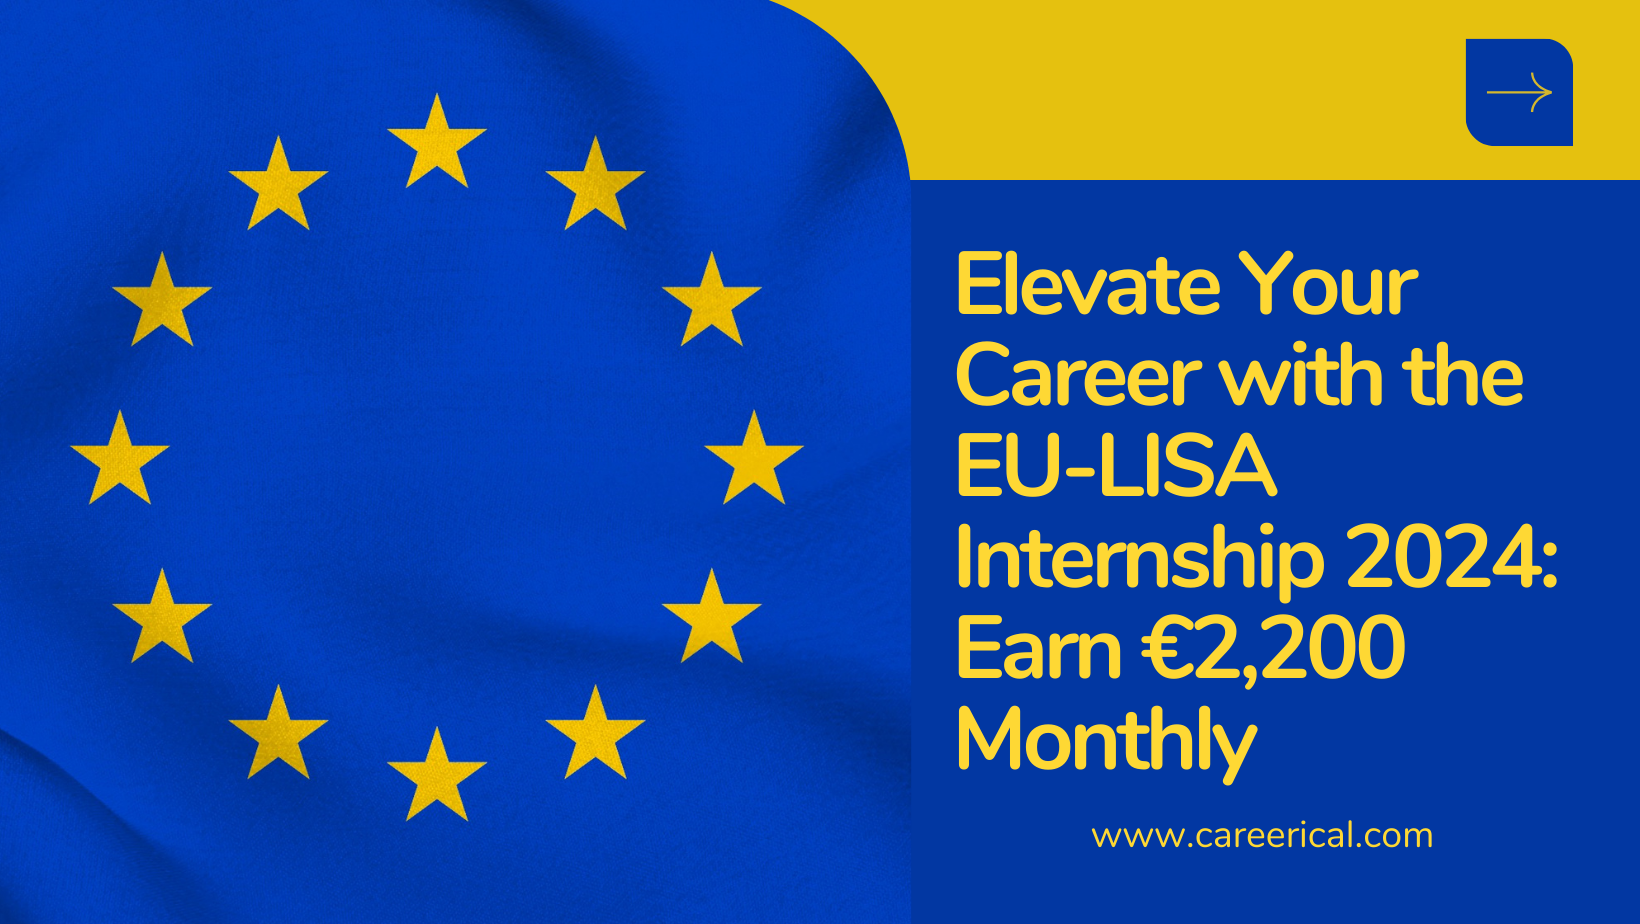 Elevate Your Career with the EU-LISA Internship 2024 Earn €2,200 Monthly